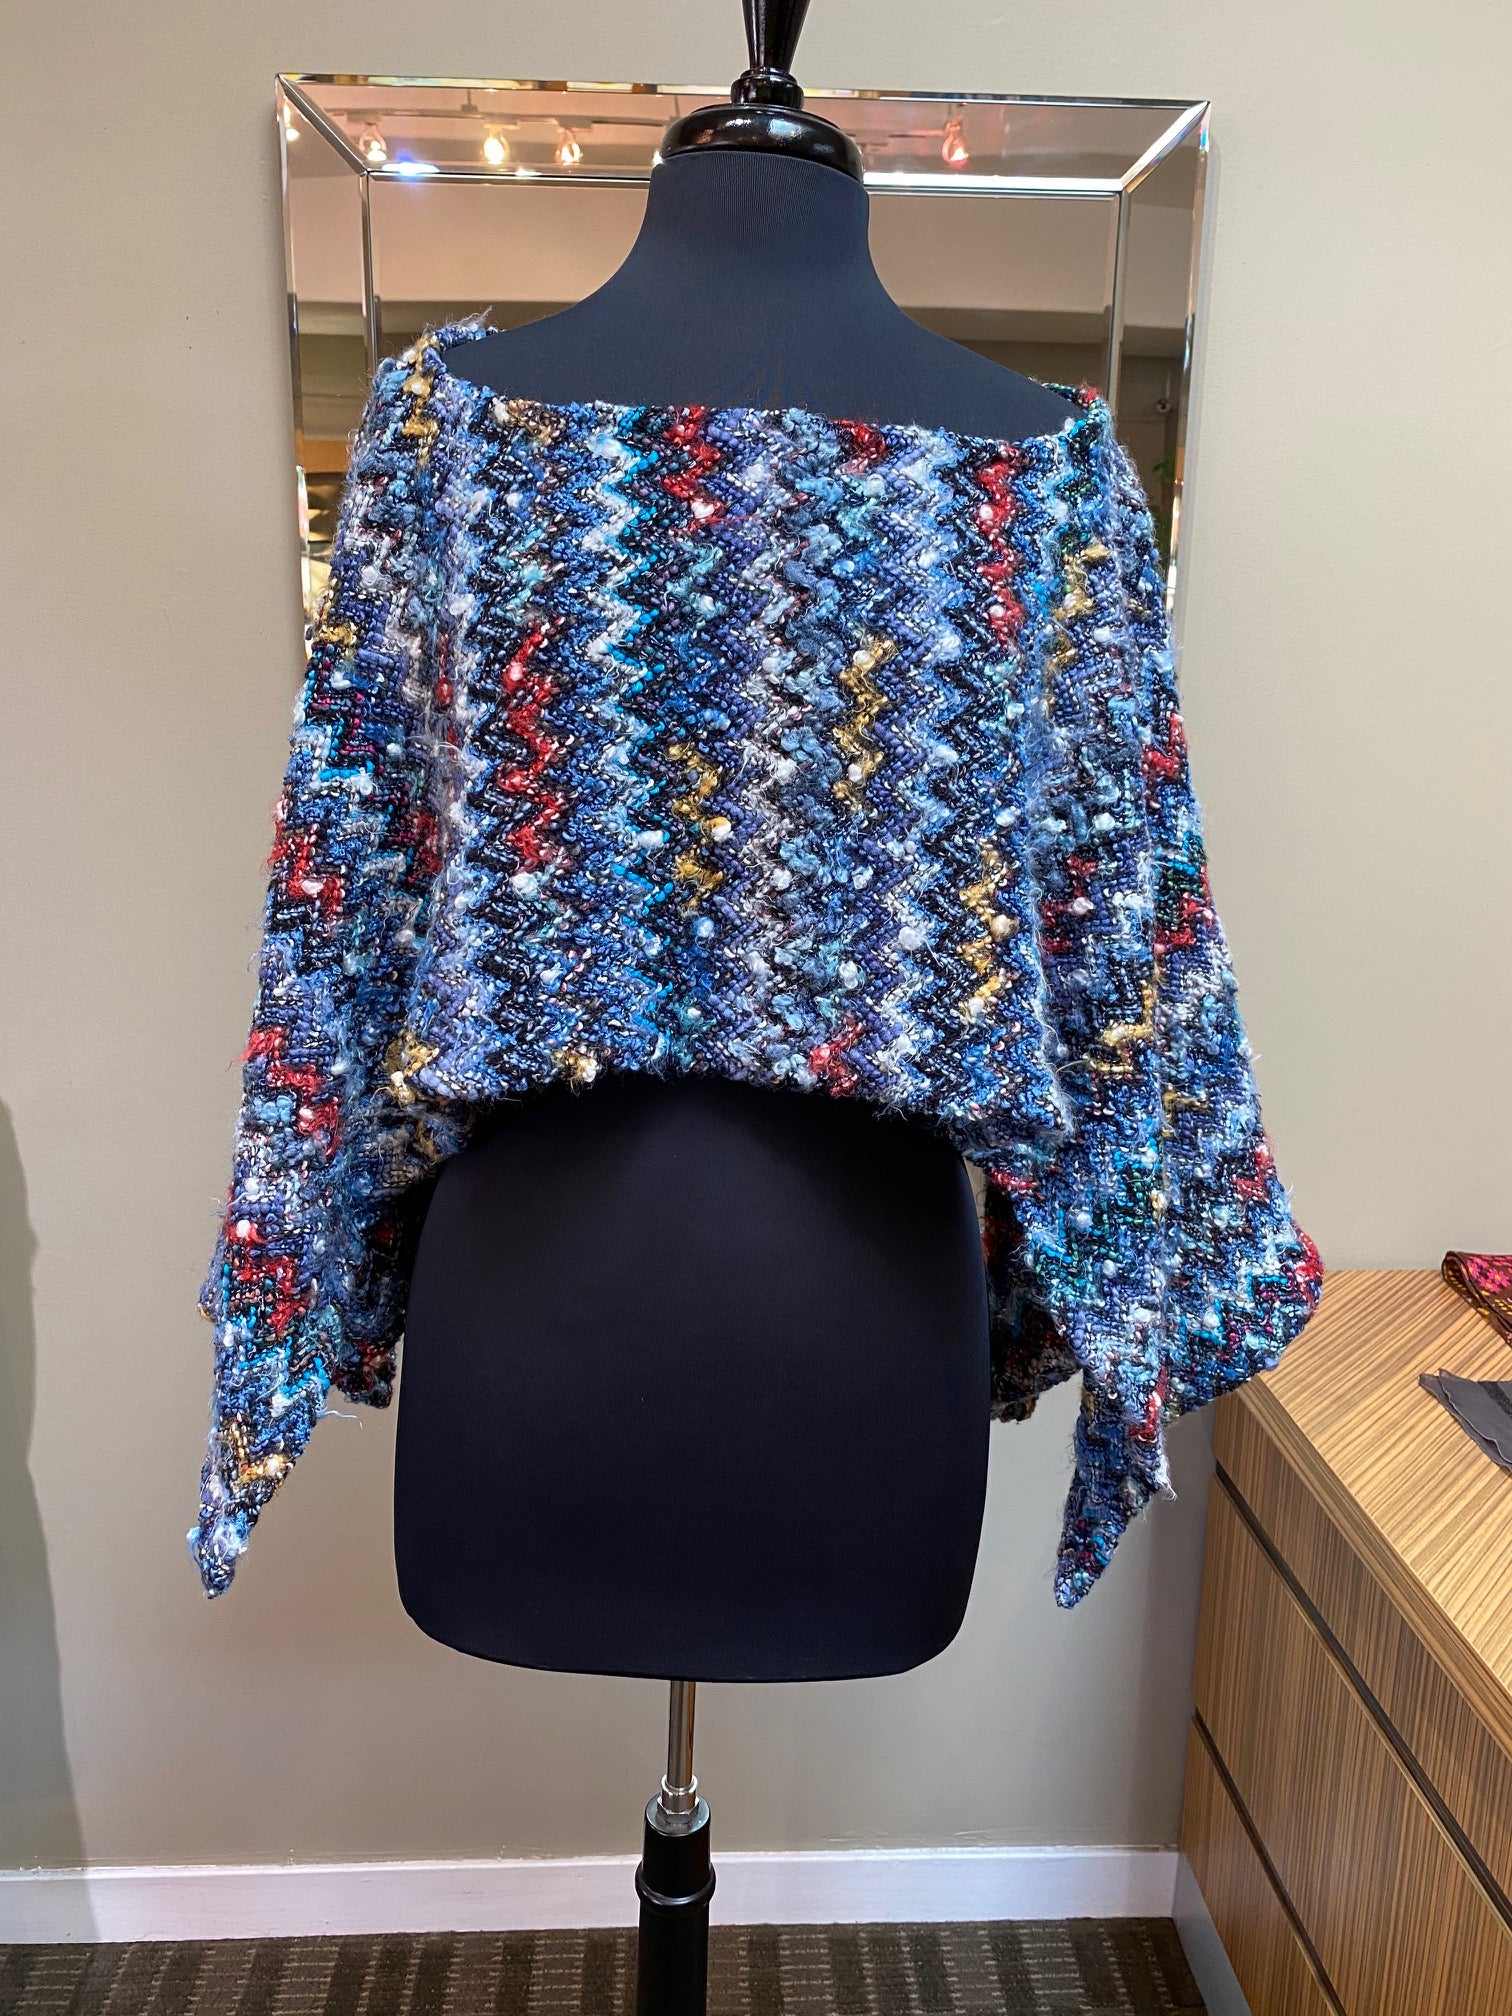 Janet Deleuse Poncho Top, SOLD